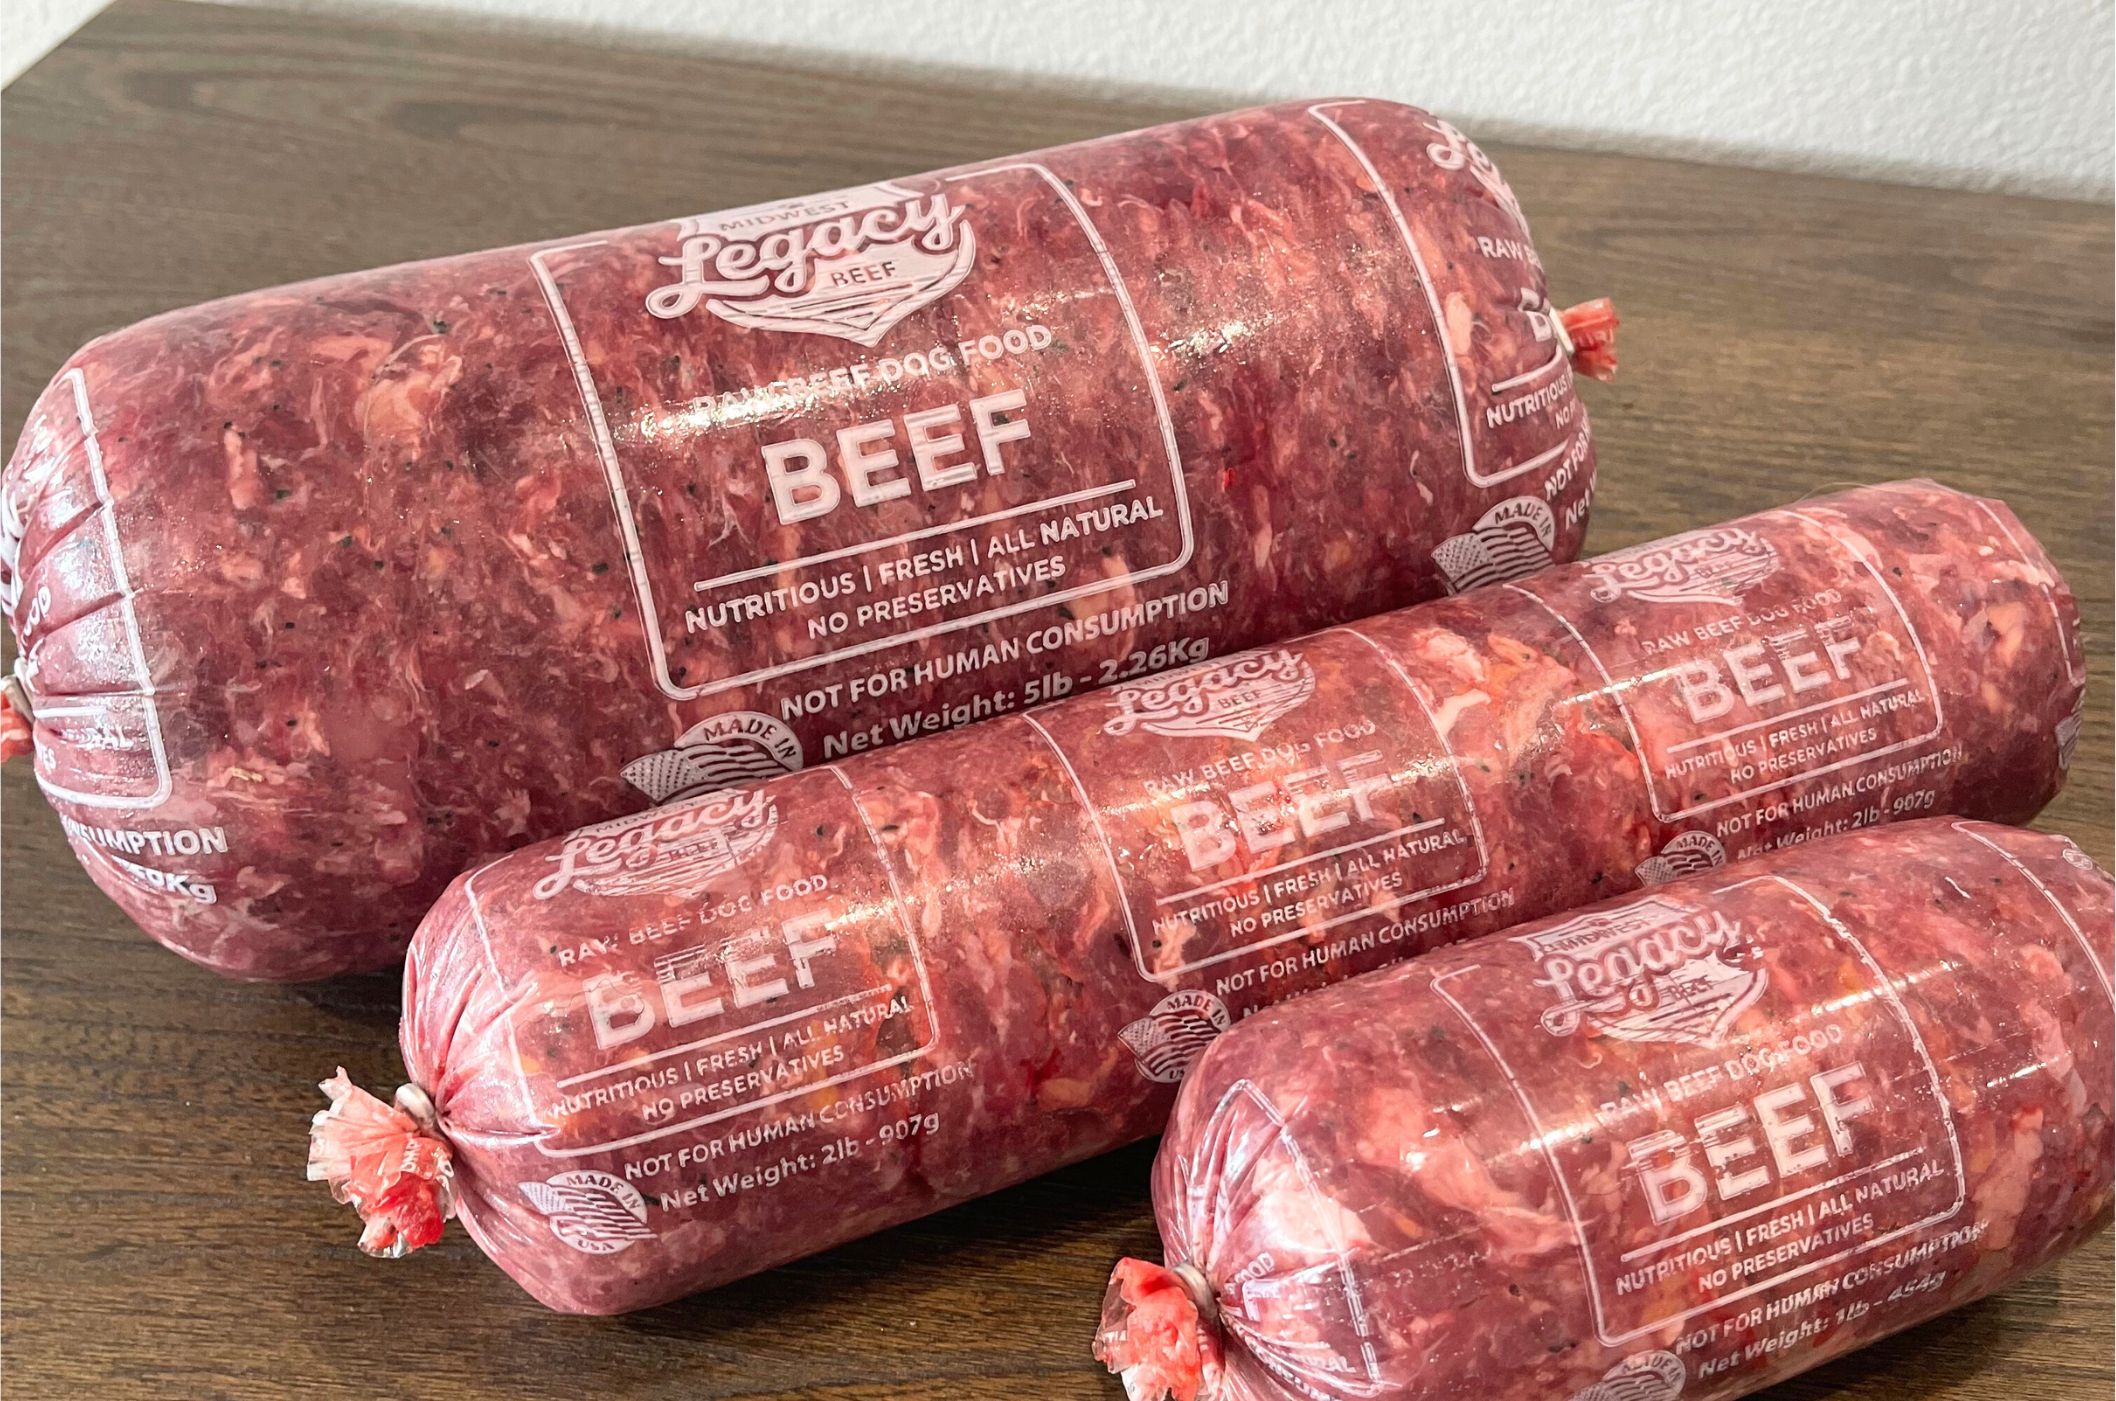 midwest dog food rolls of raw beef in 5, 2 and 1 pound chubs on wooden table